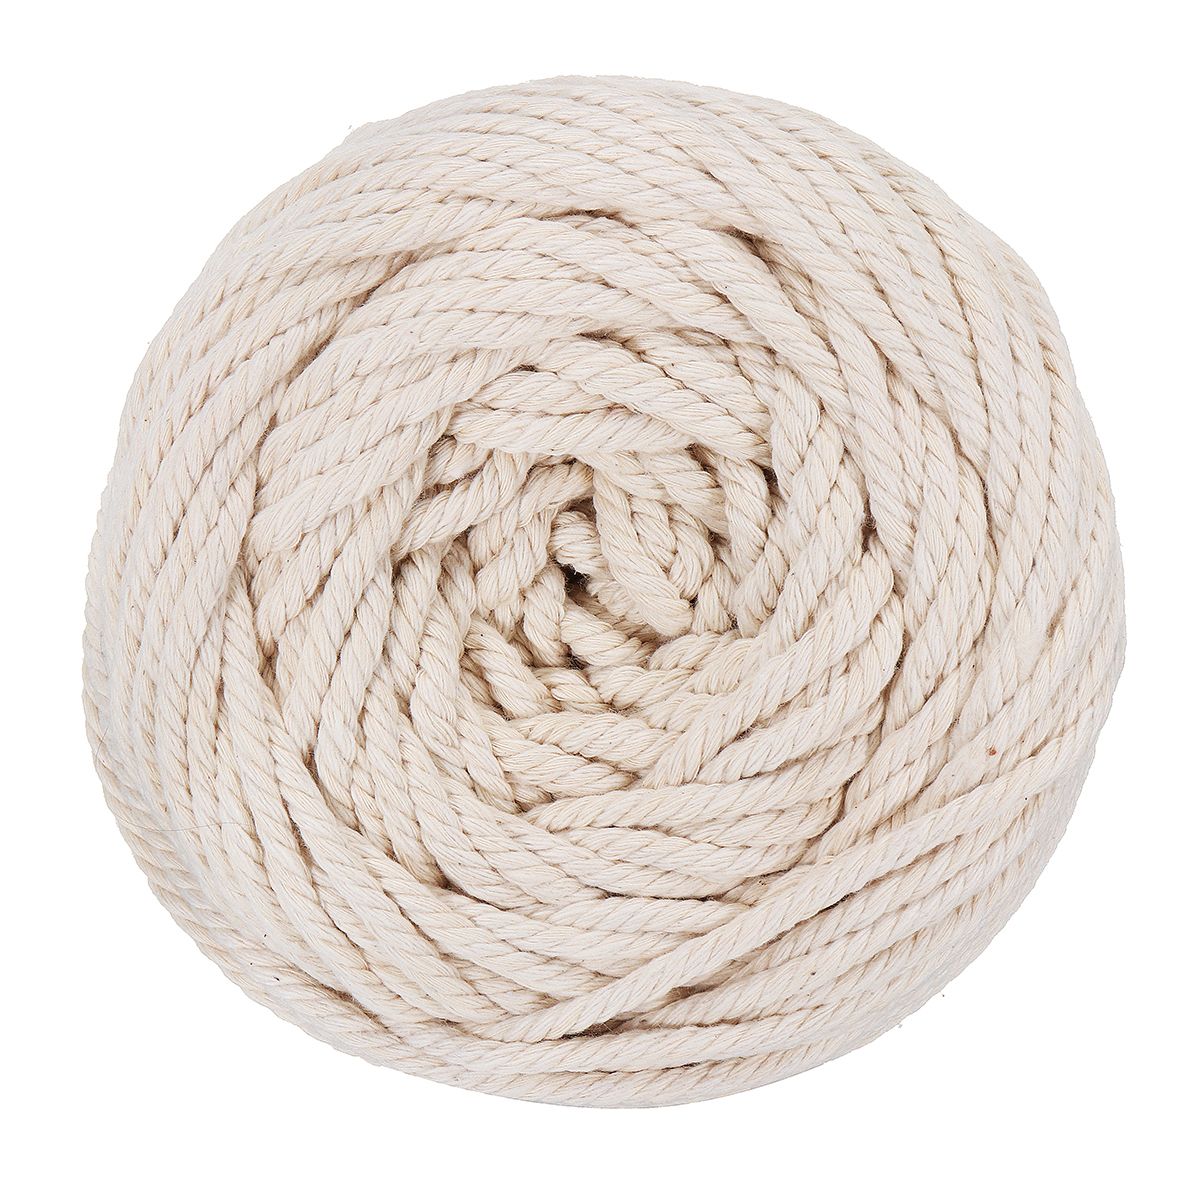 4mmx100m-Natural-Beige-Cotton-Twisted-Cord-Rope-DIY-Craft-Macrame-Woven-String-Braided-Wire-1394850